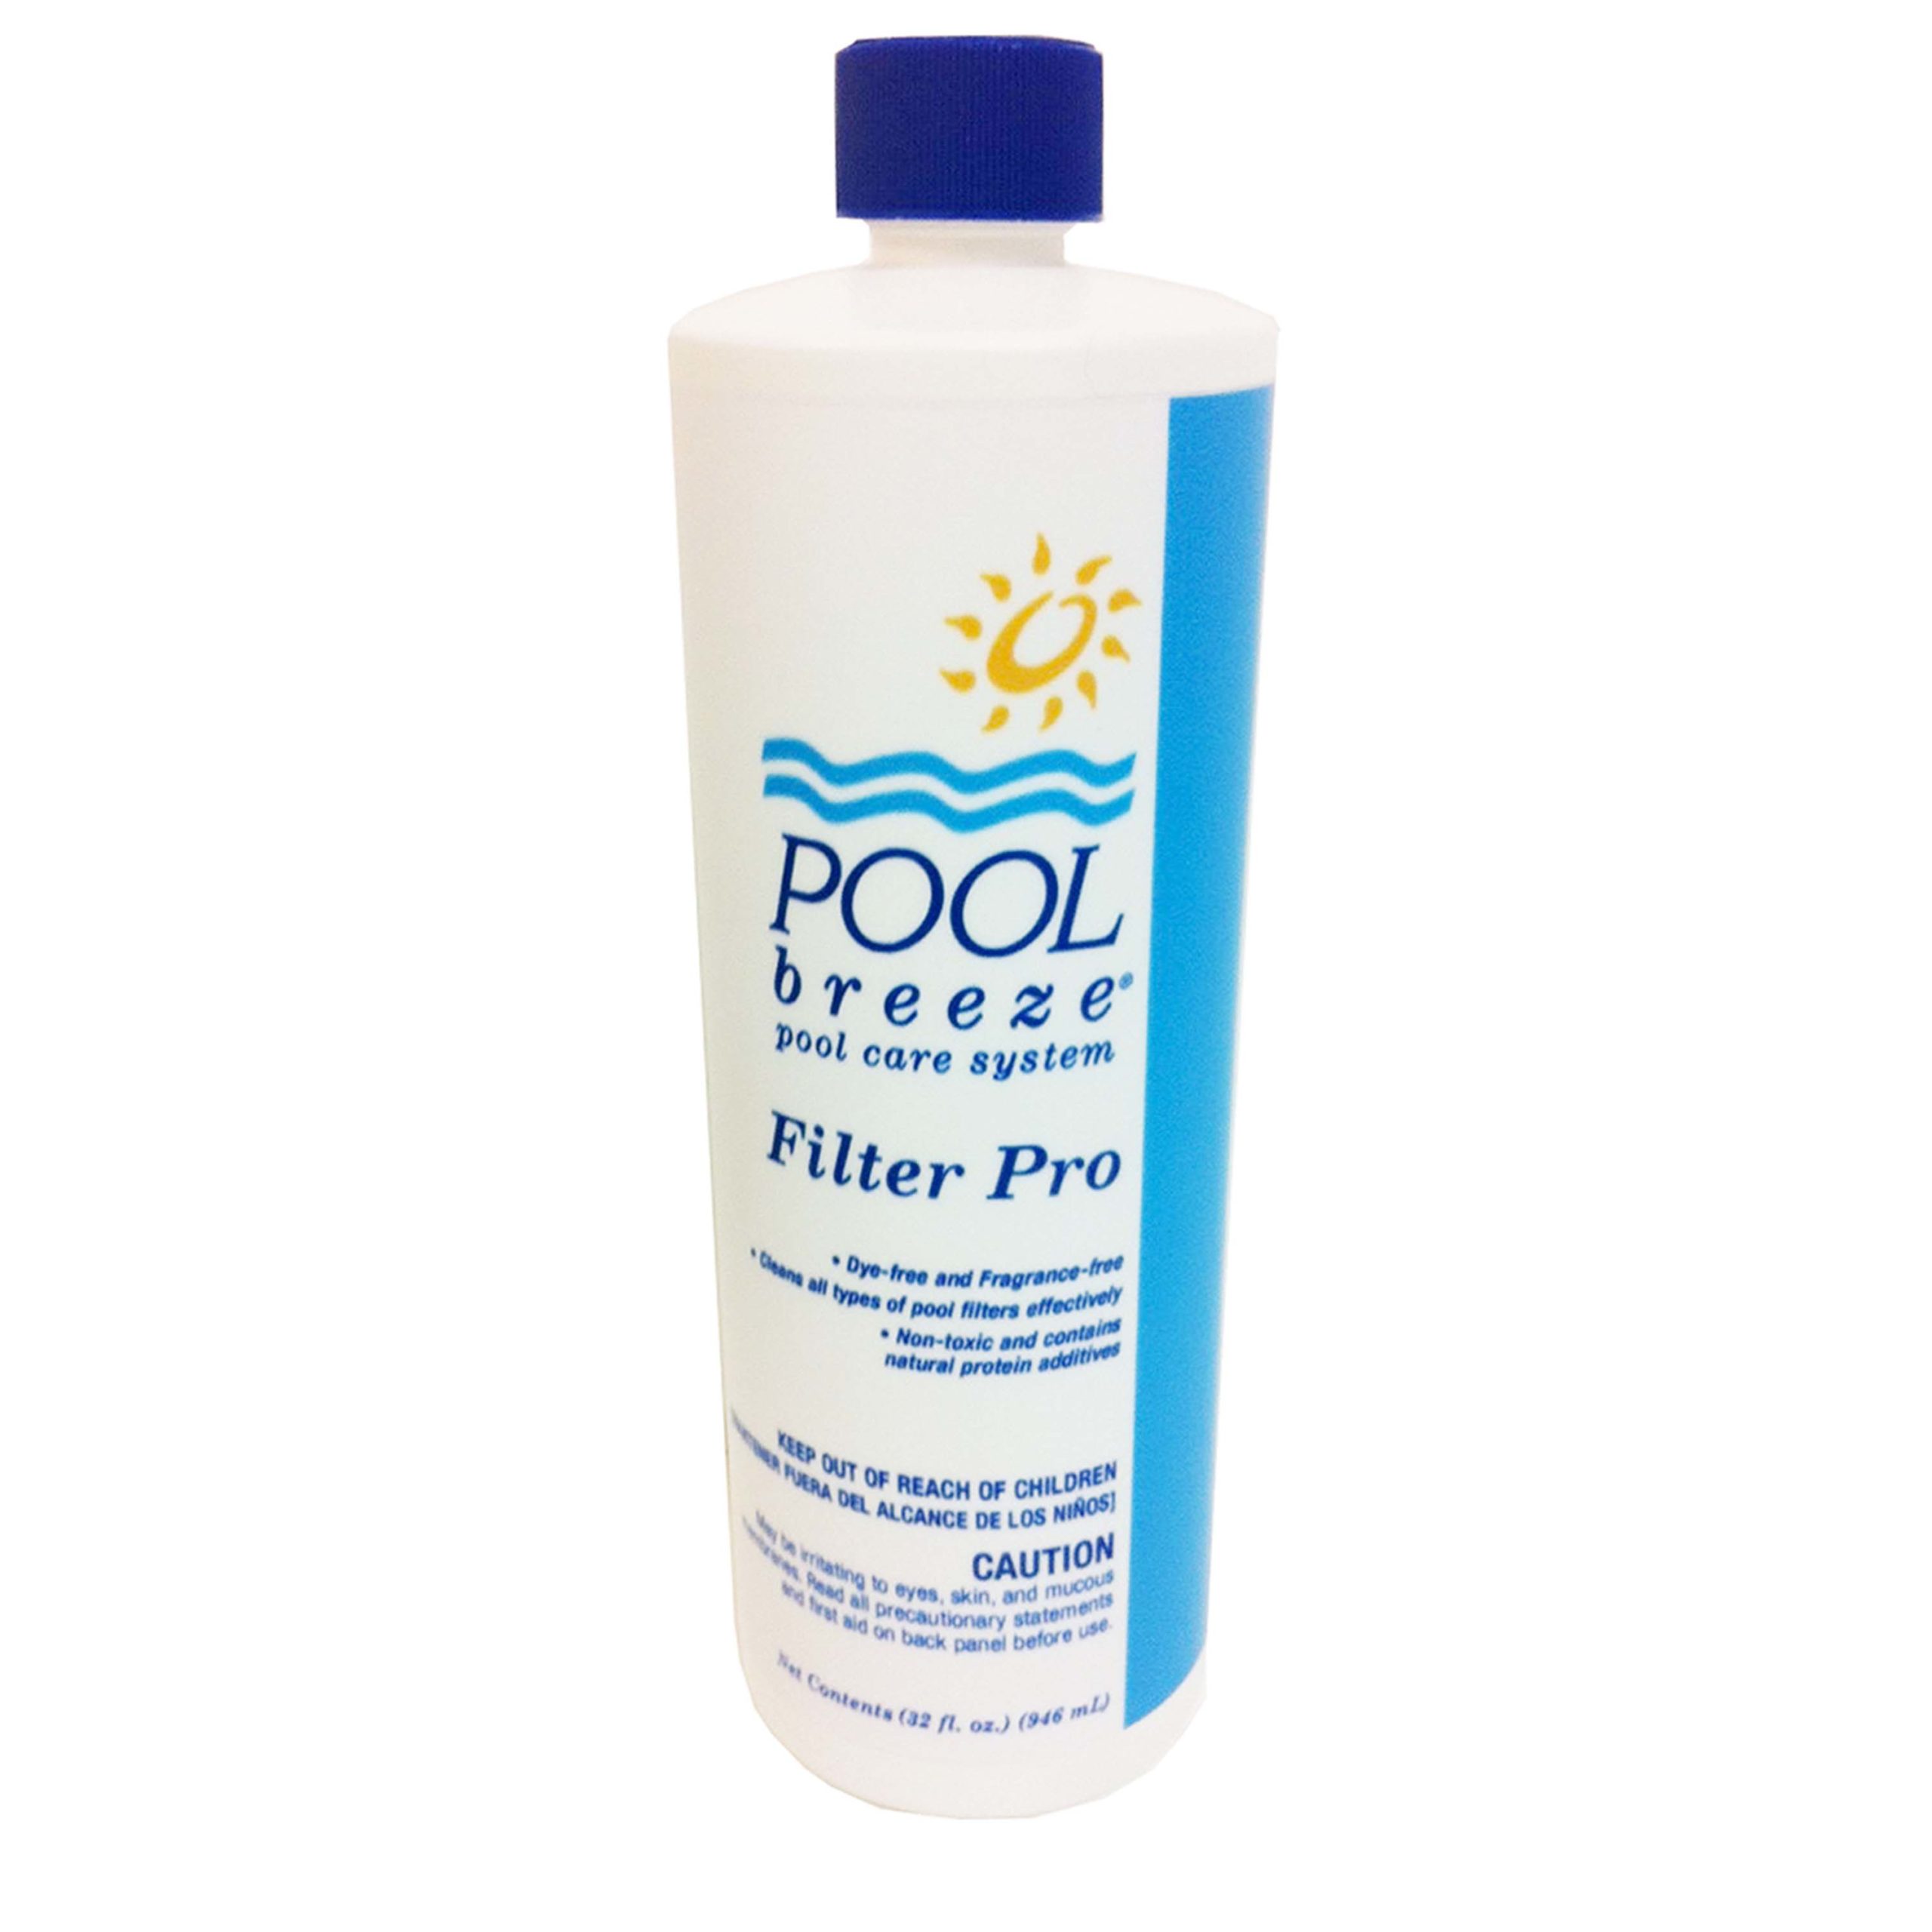 POOL Breeze Filter Pro - nontoxic pool filter cleaner